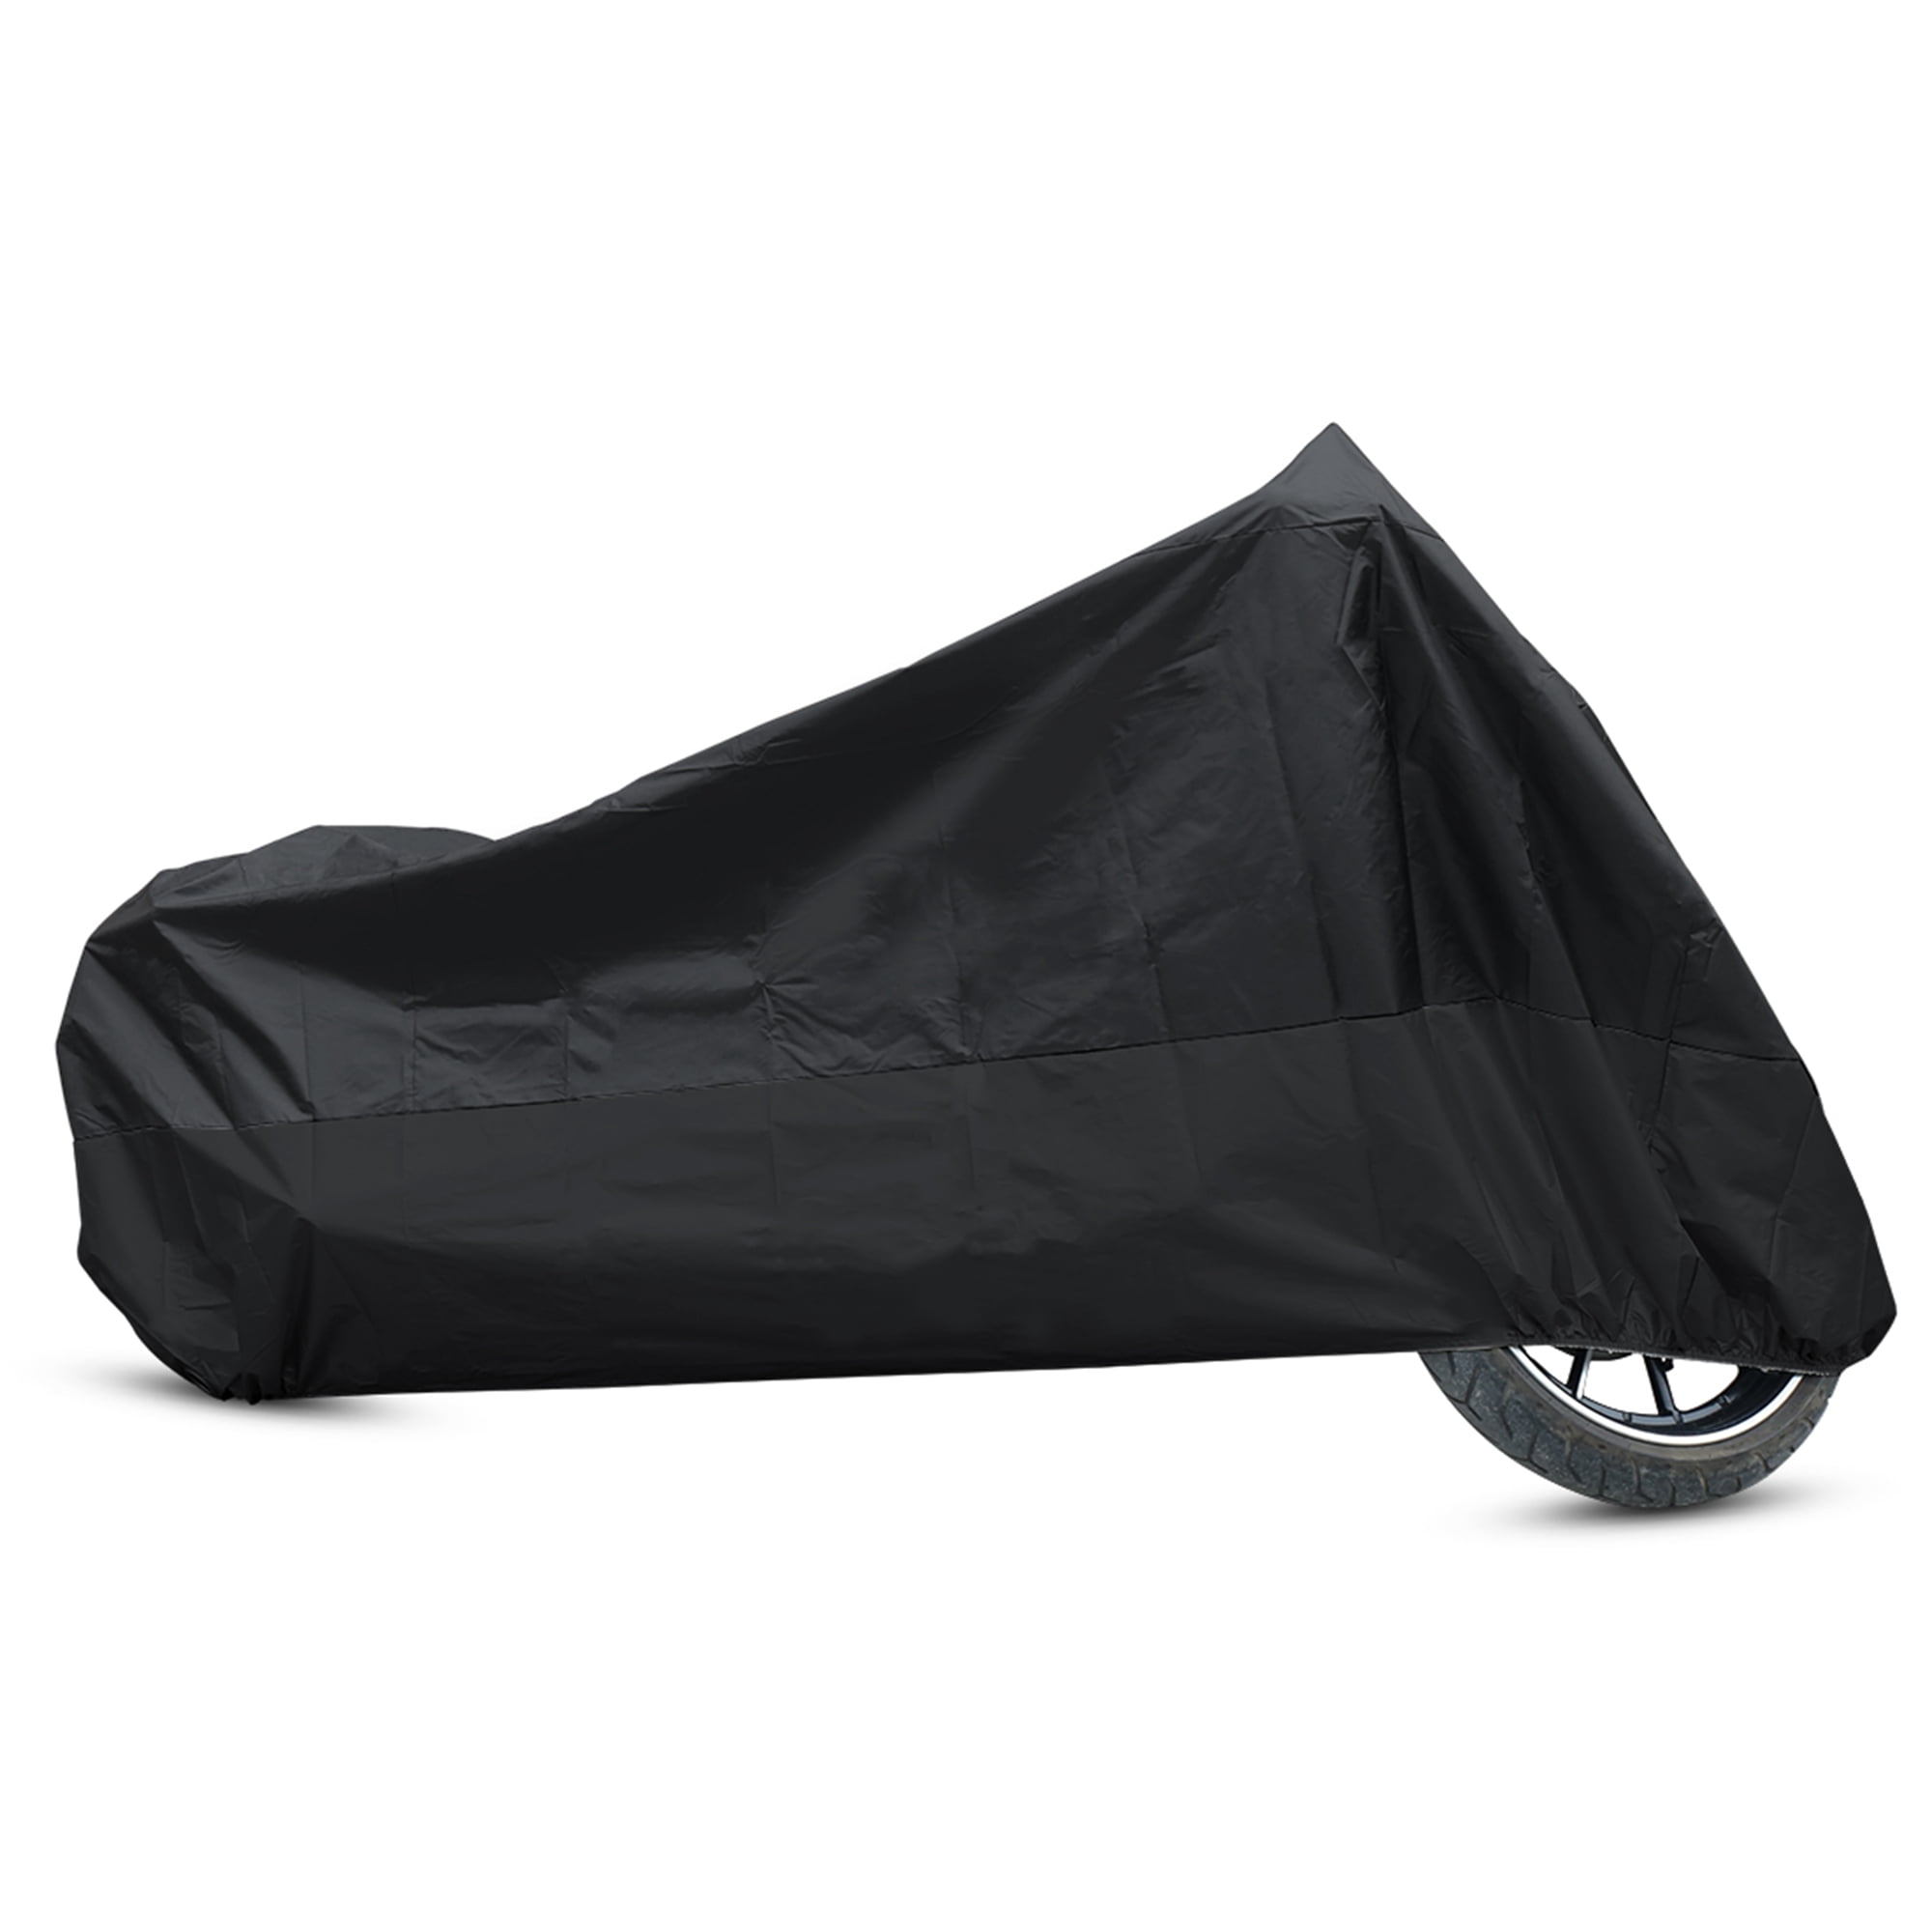 XXL Black&Red Waterproof Motorcycle Cover For Harley Davidson Fatboy Softail